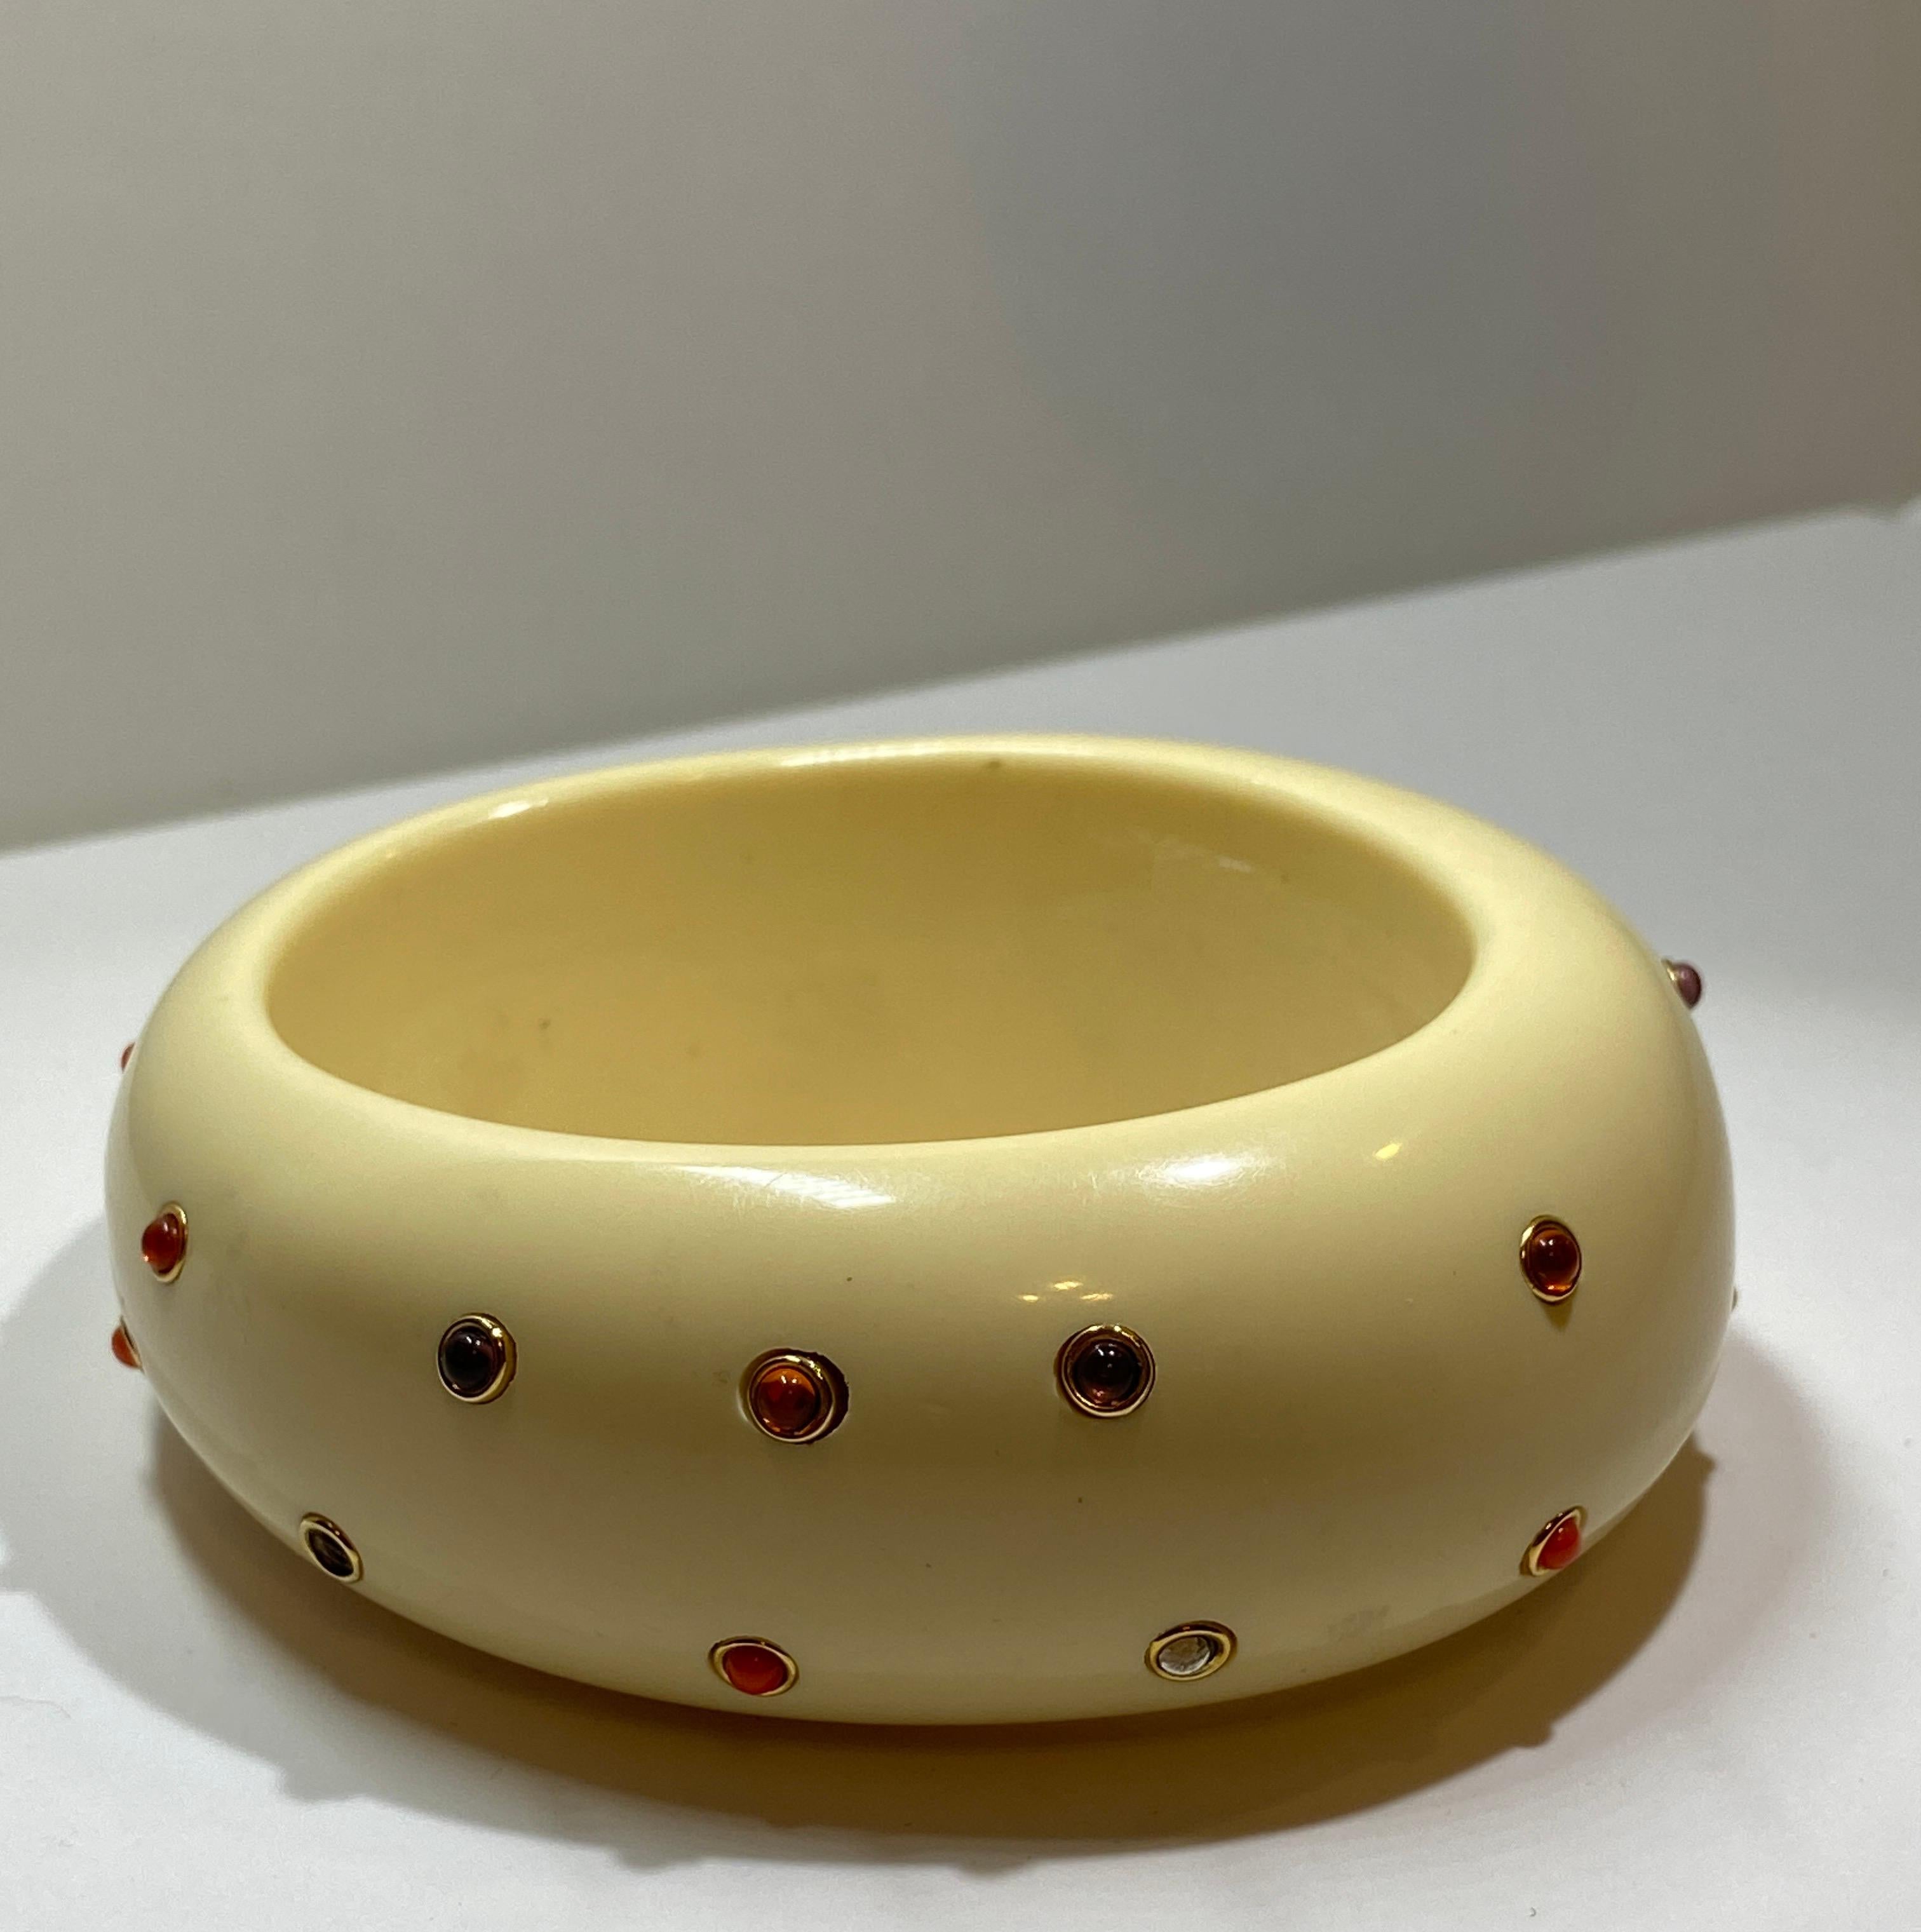 Huge Whimsical Lee Angel's cream lucite ivory-like bangle is accented with micro-size multi-colored semi-gems in colors of coral, reds, diamonds and purples. There are 3 stones missing but hardly noticeable. The interior circumference measures 7 3/4